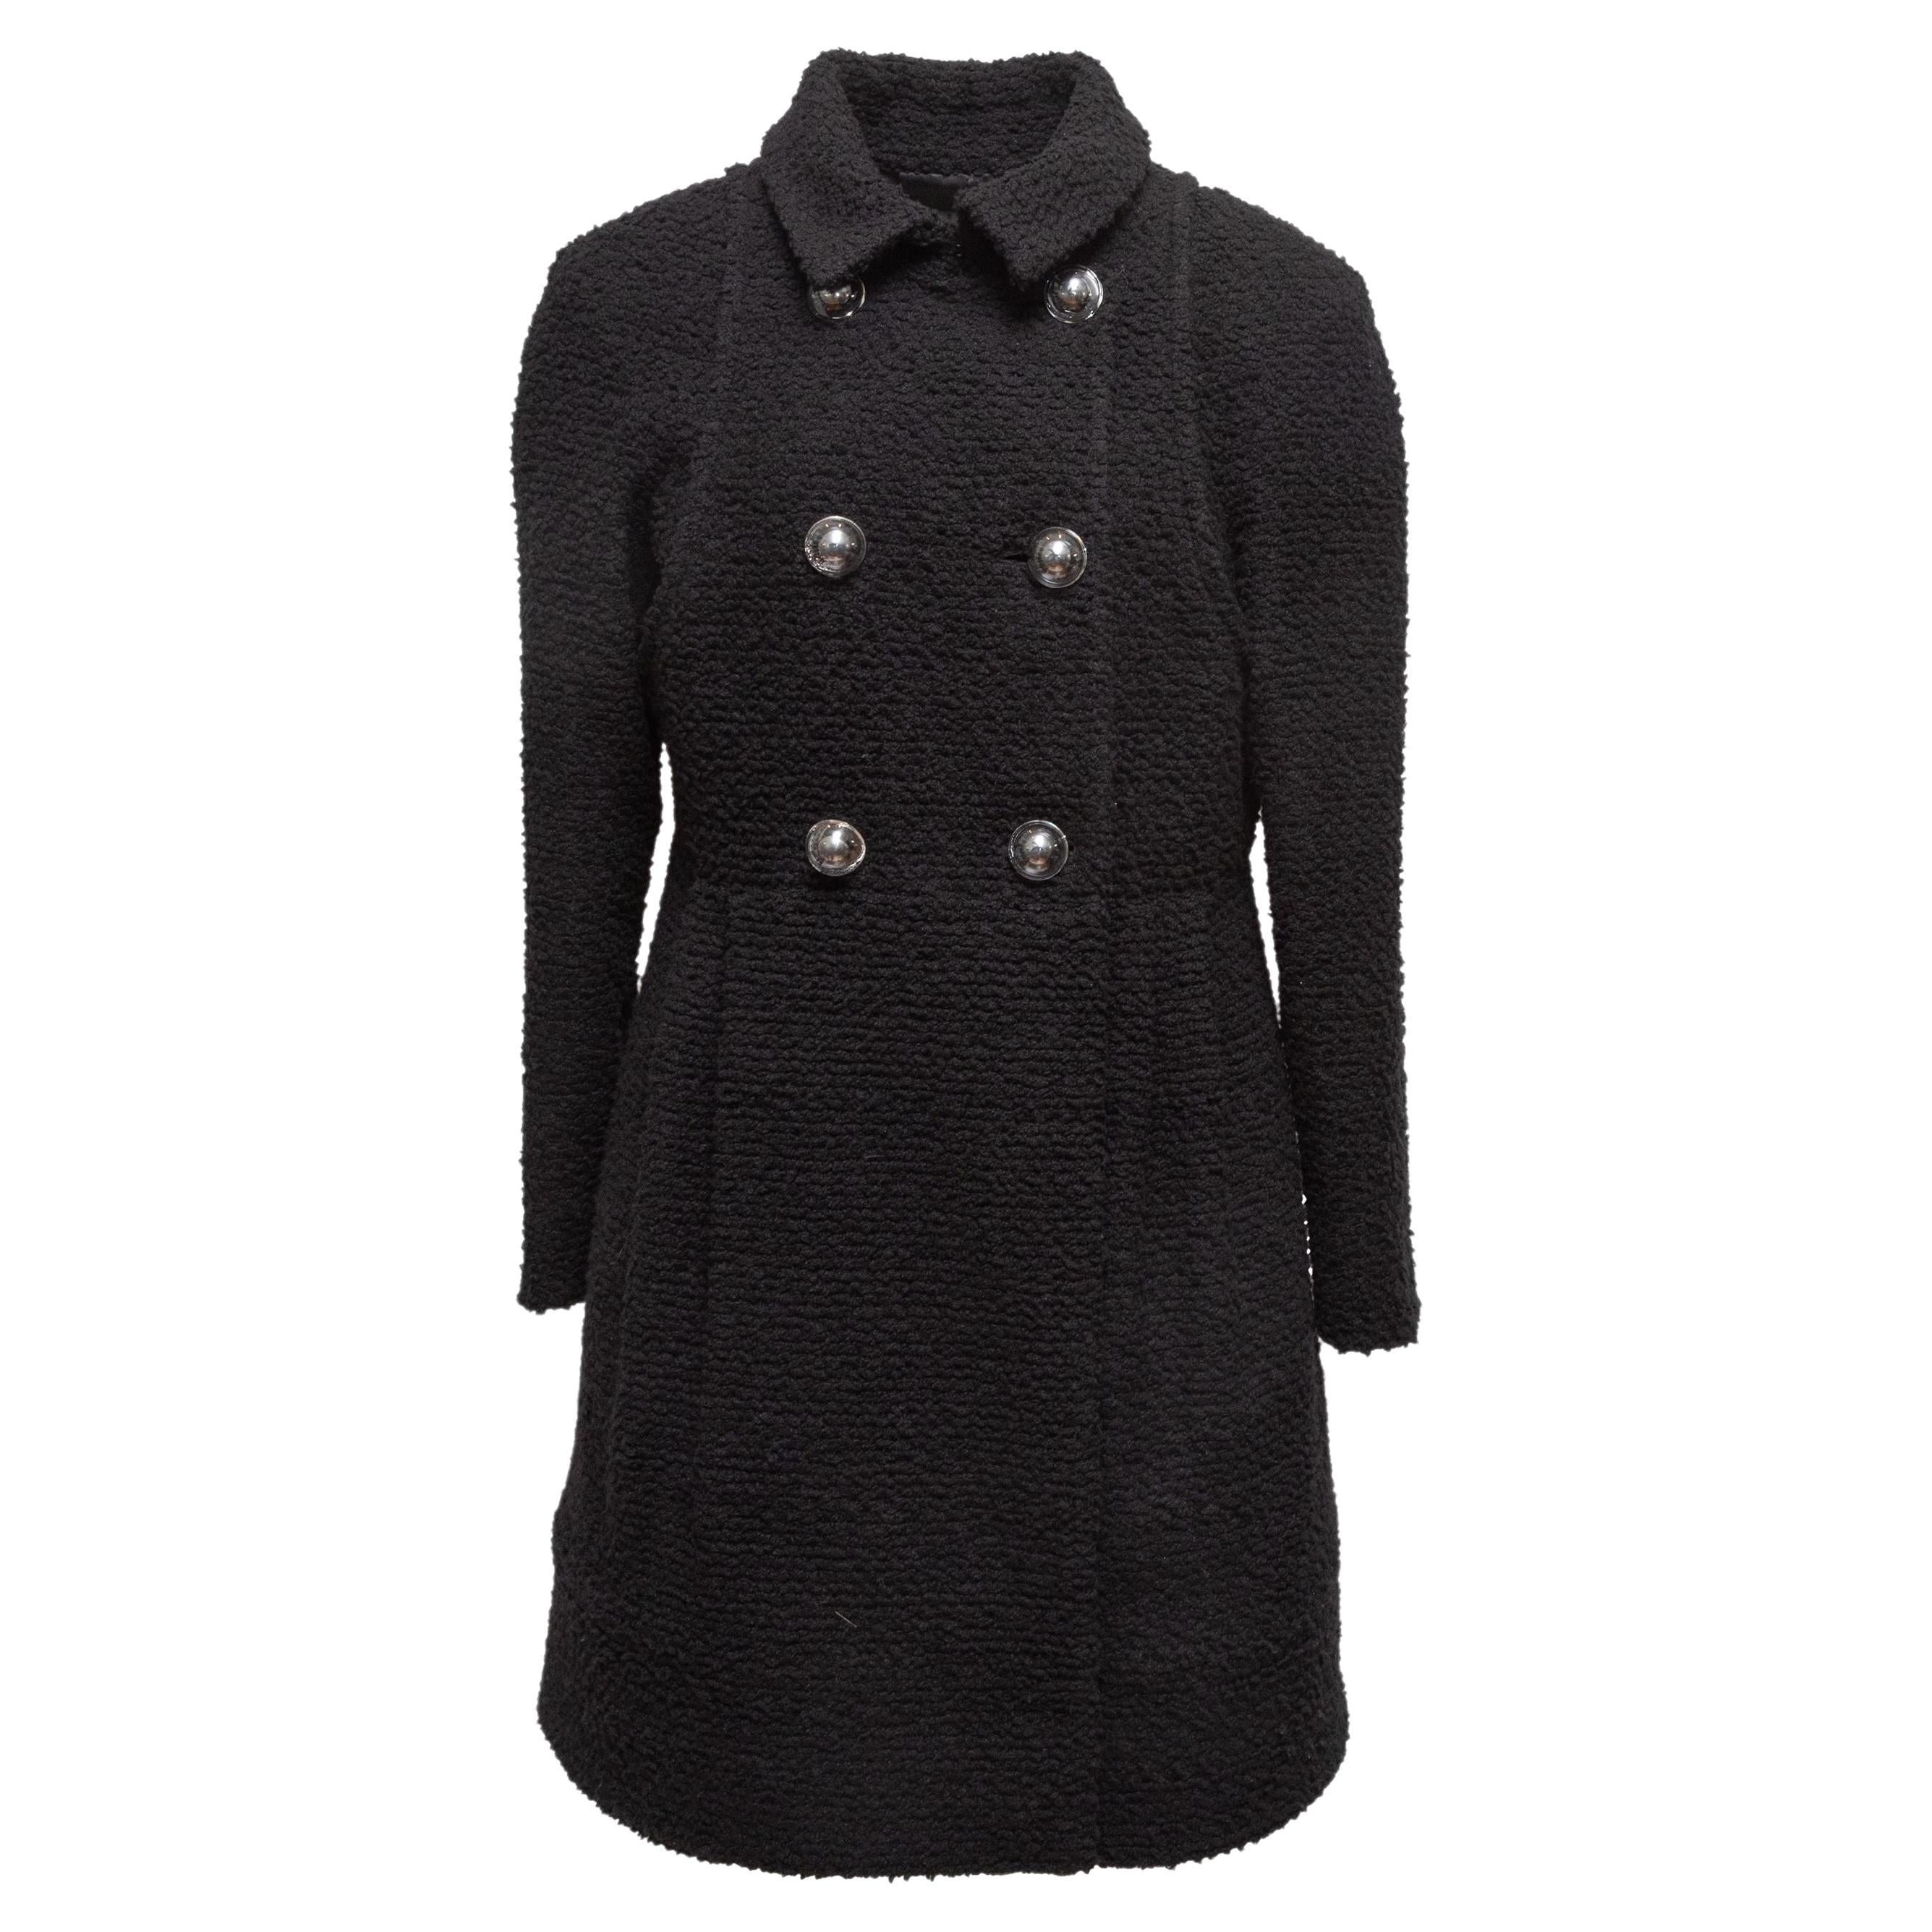 Chanel Black Boucle Wool Double-Breasted Coat